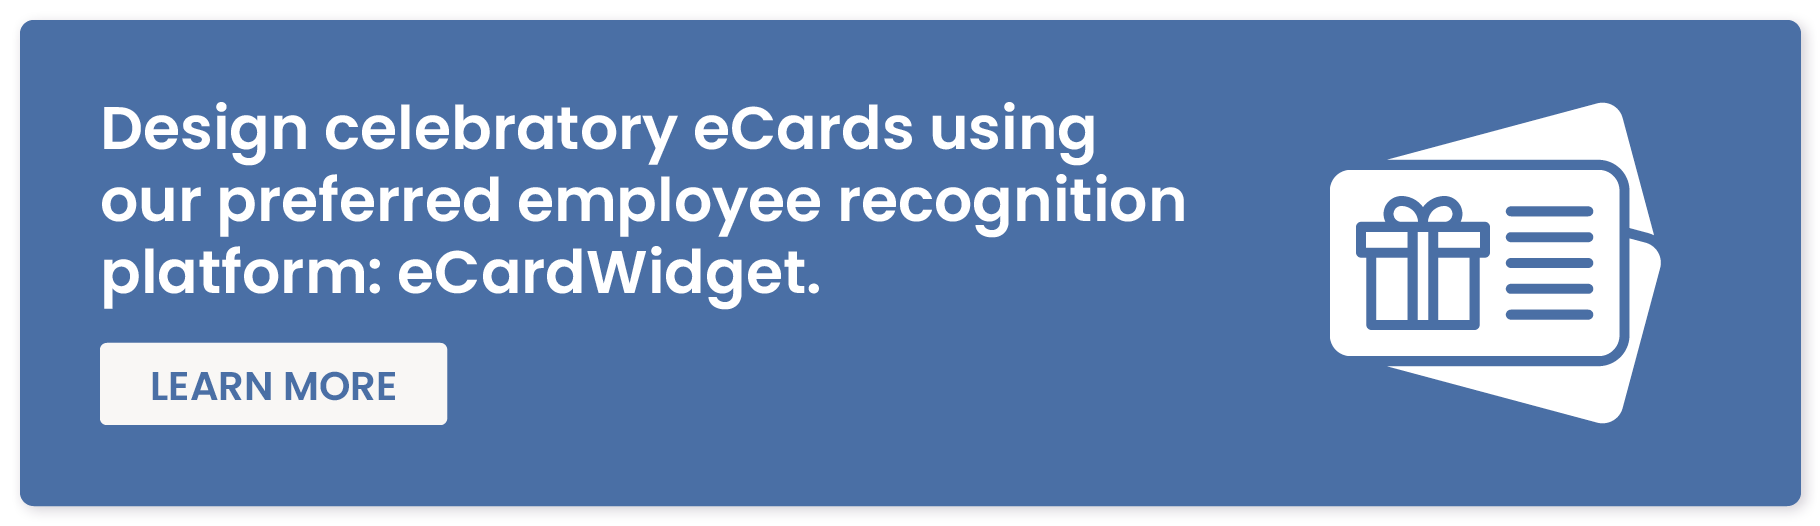 Learn more about our top recommended employee recognition platform, eCardWidget.